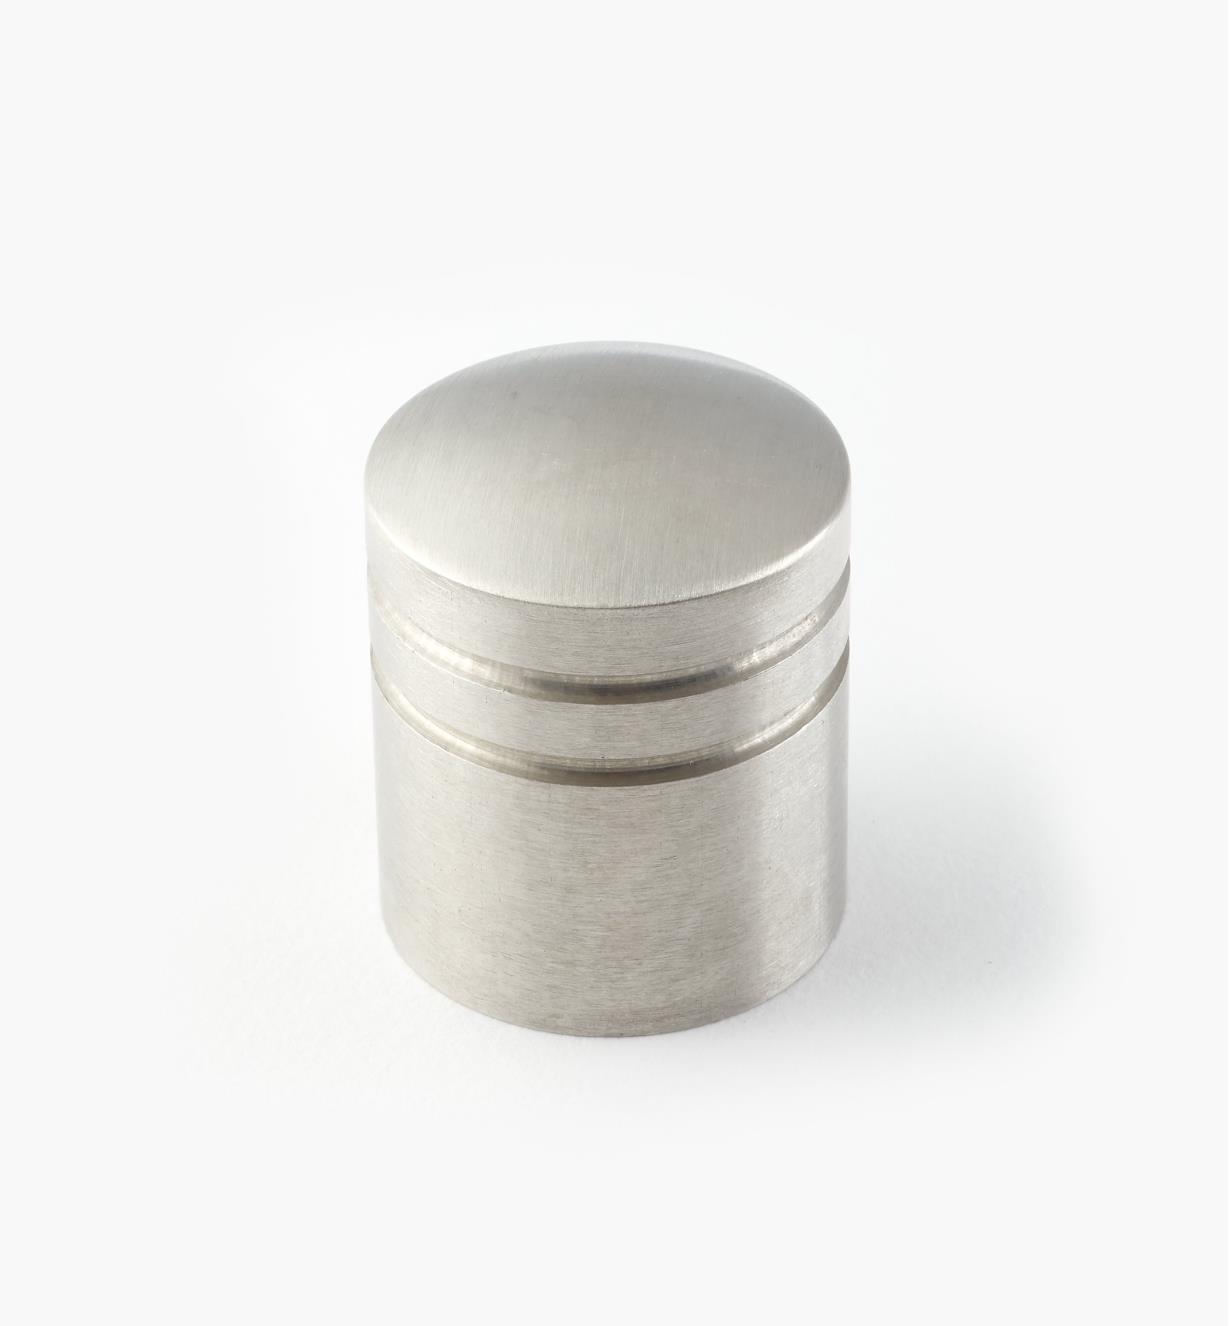 01W6952 - 25mm x 30mm Stainless Steel Ribbed Knob